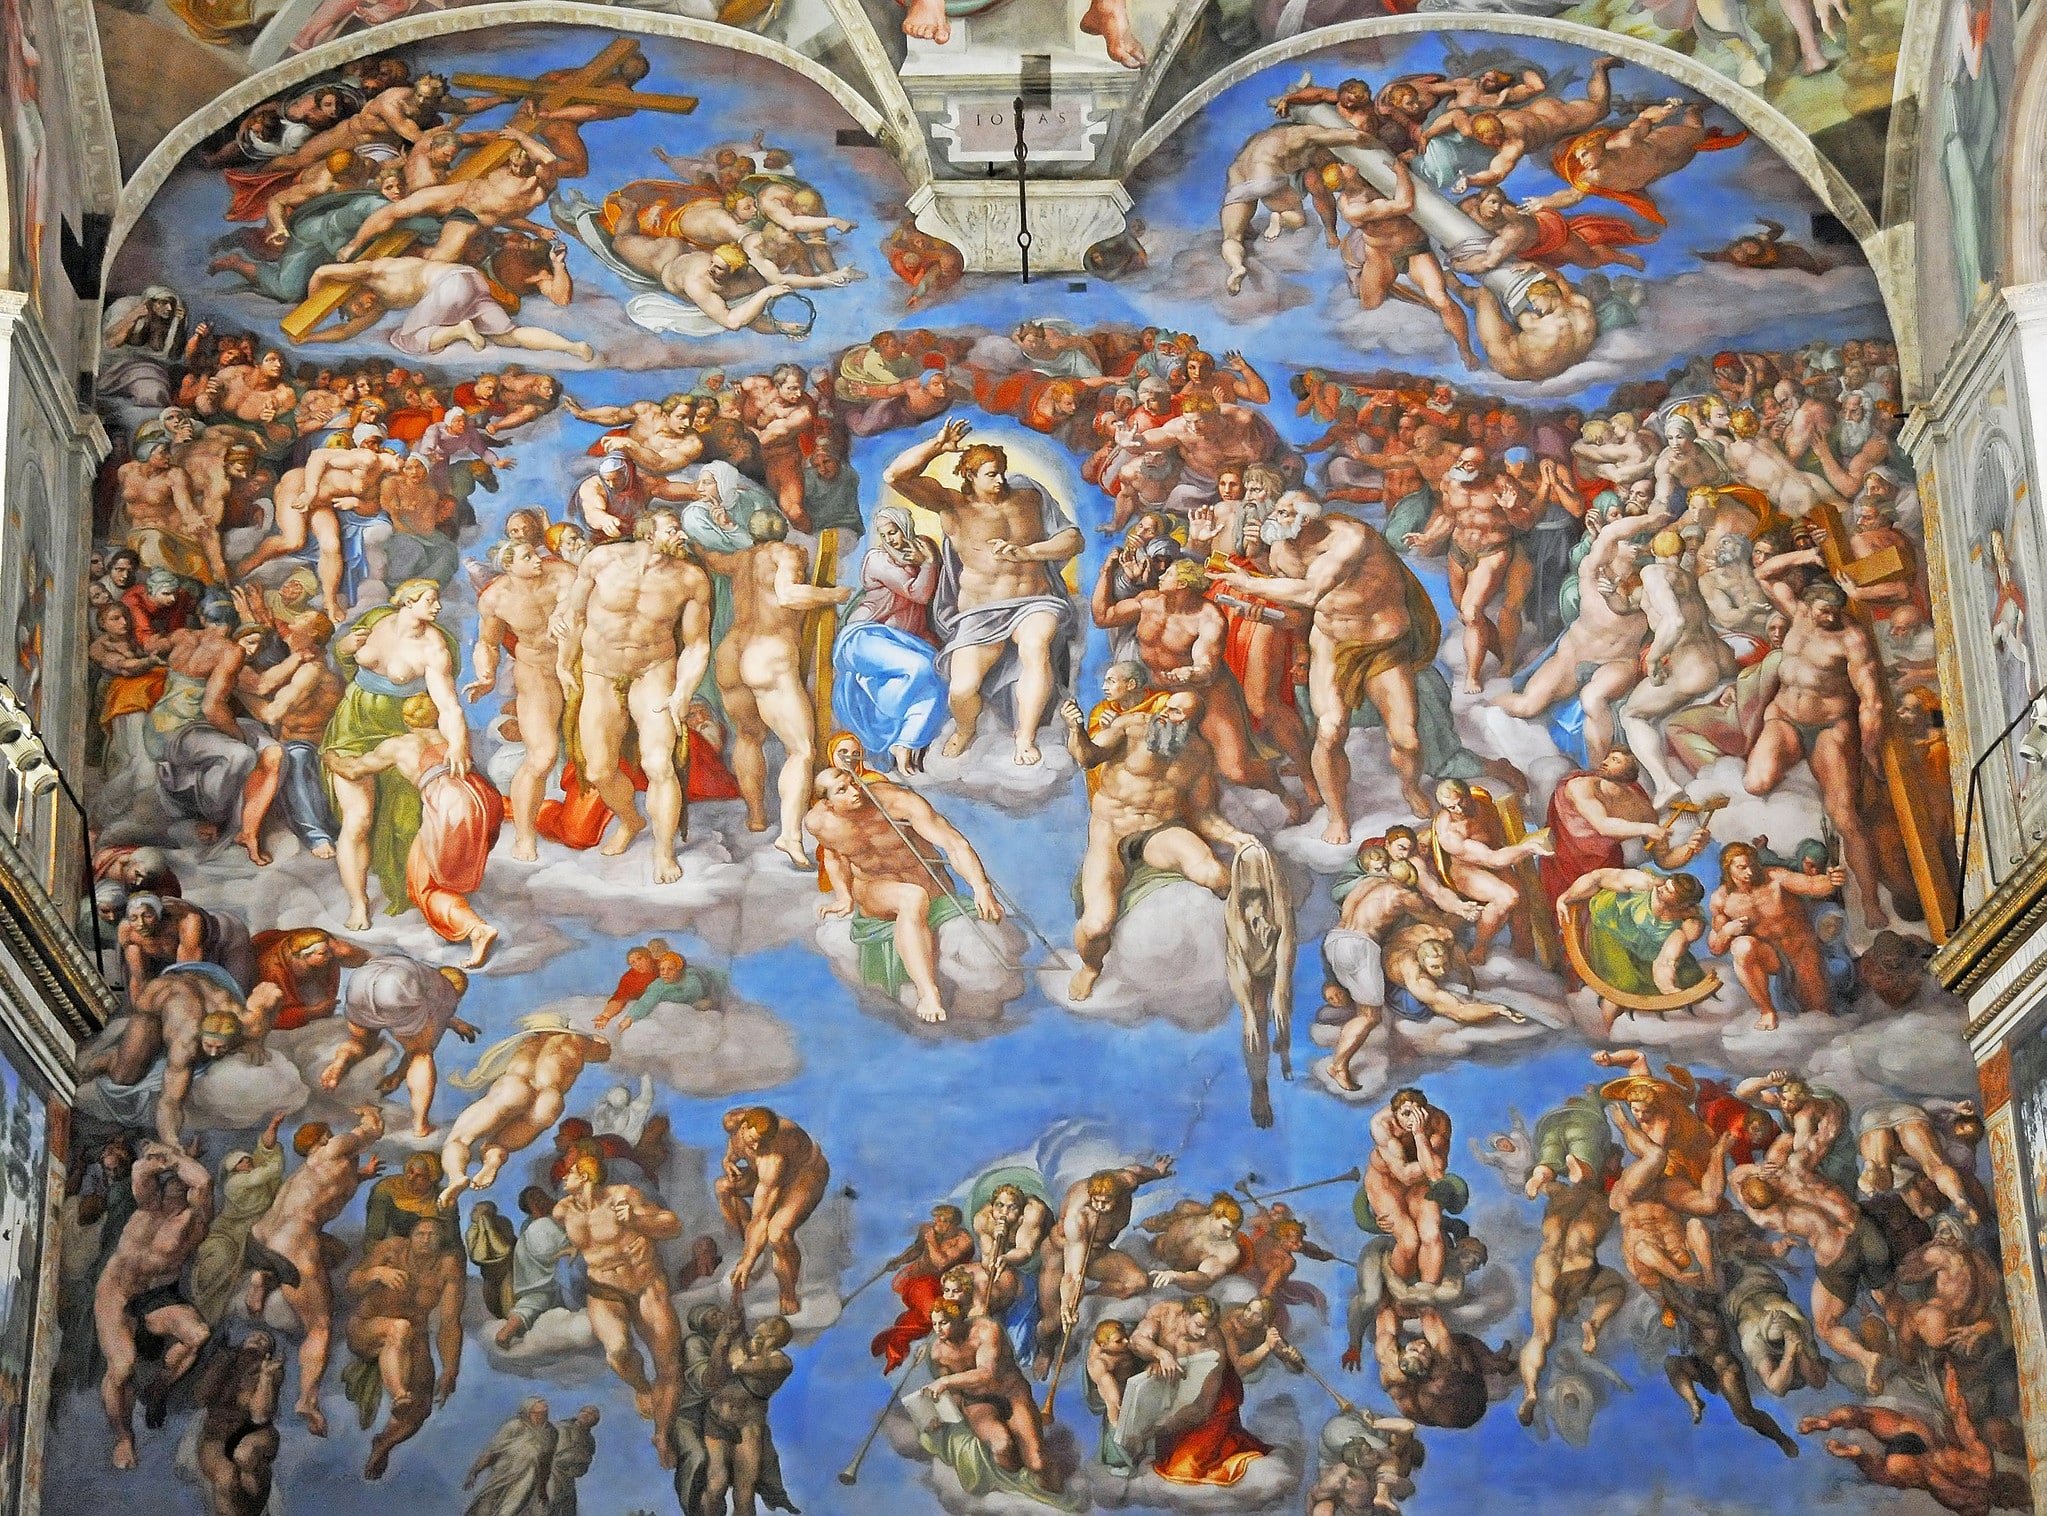 A picture of The painting, The Last Judgement